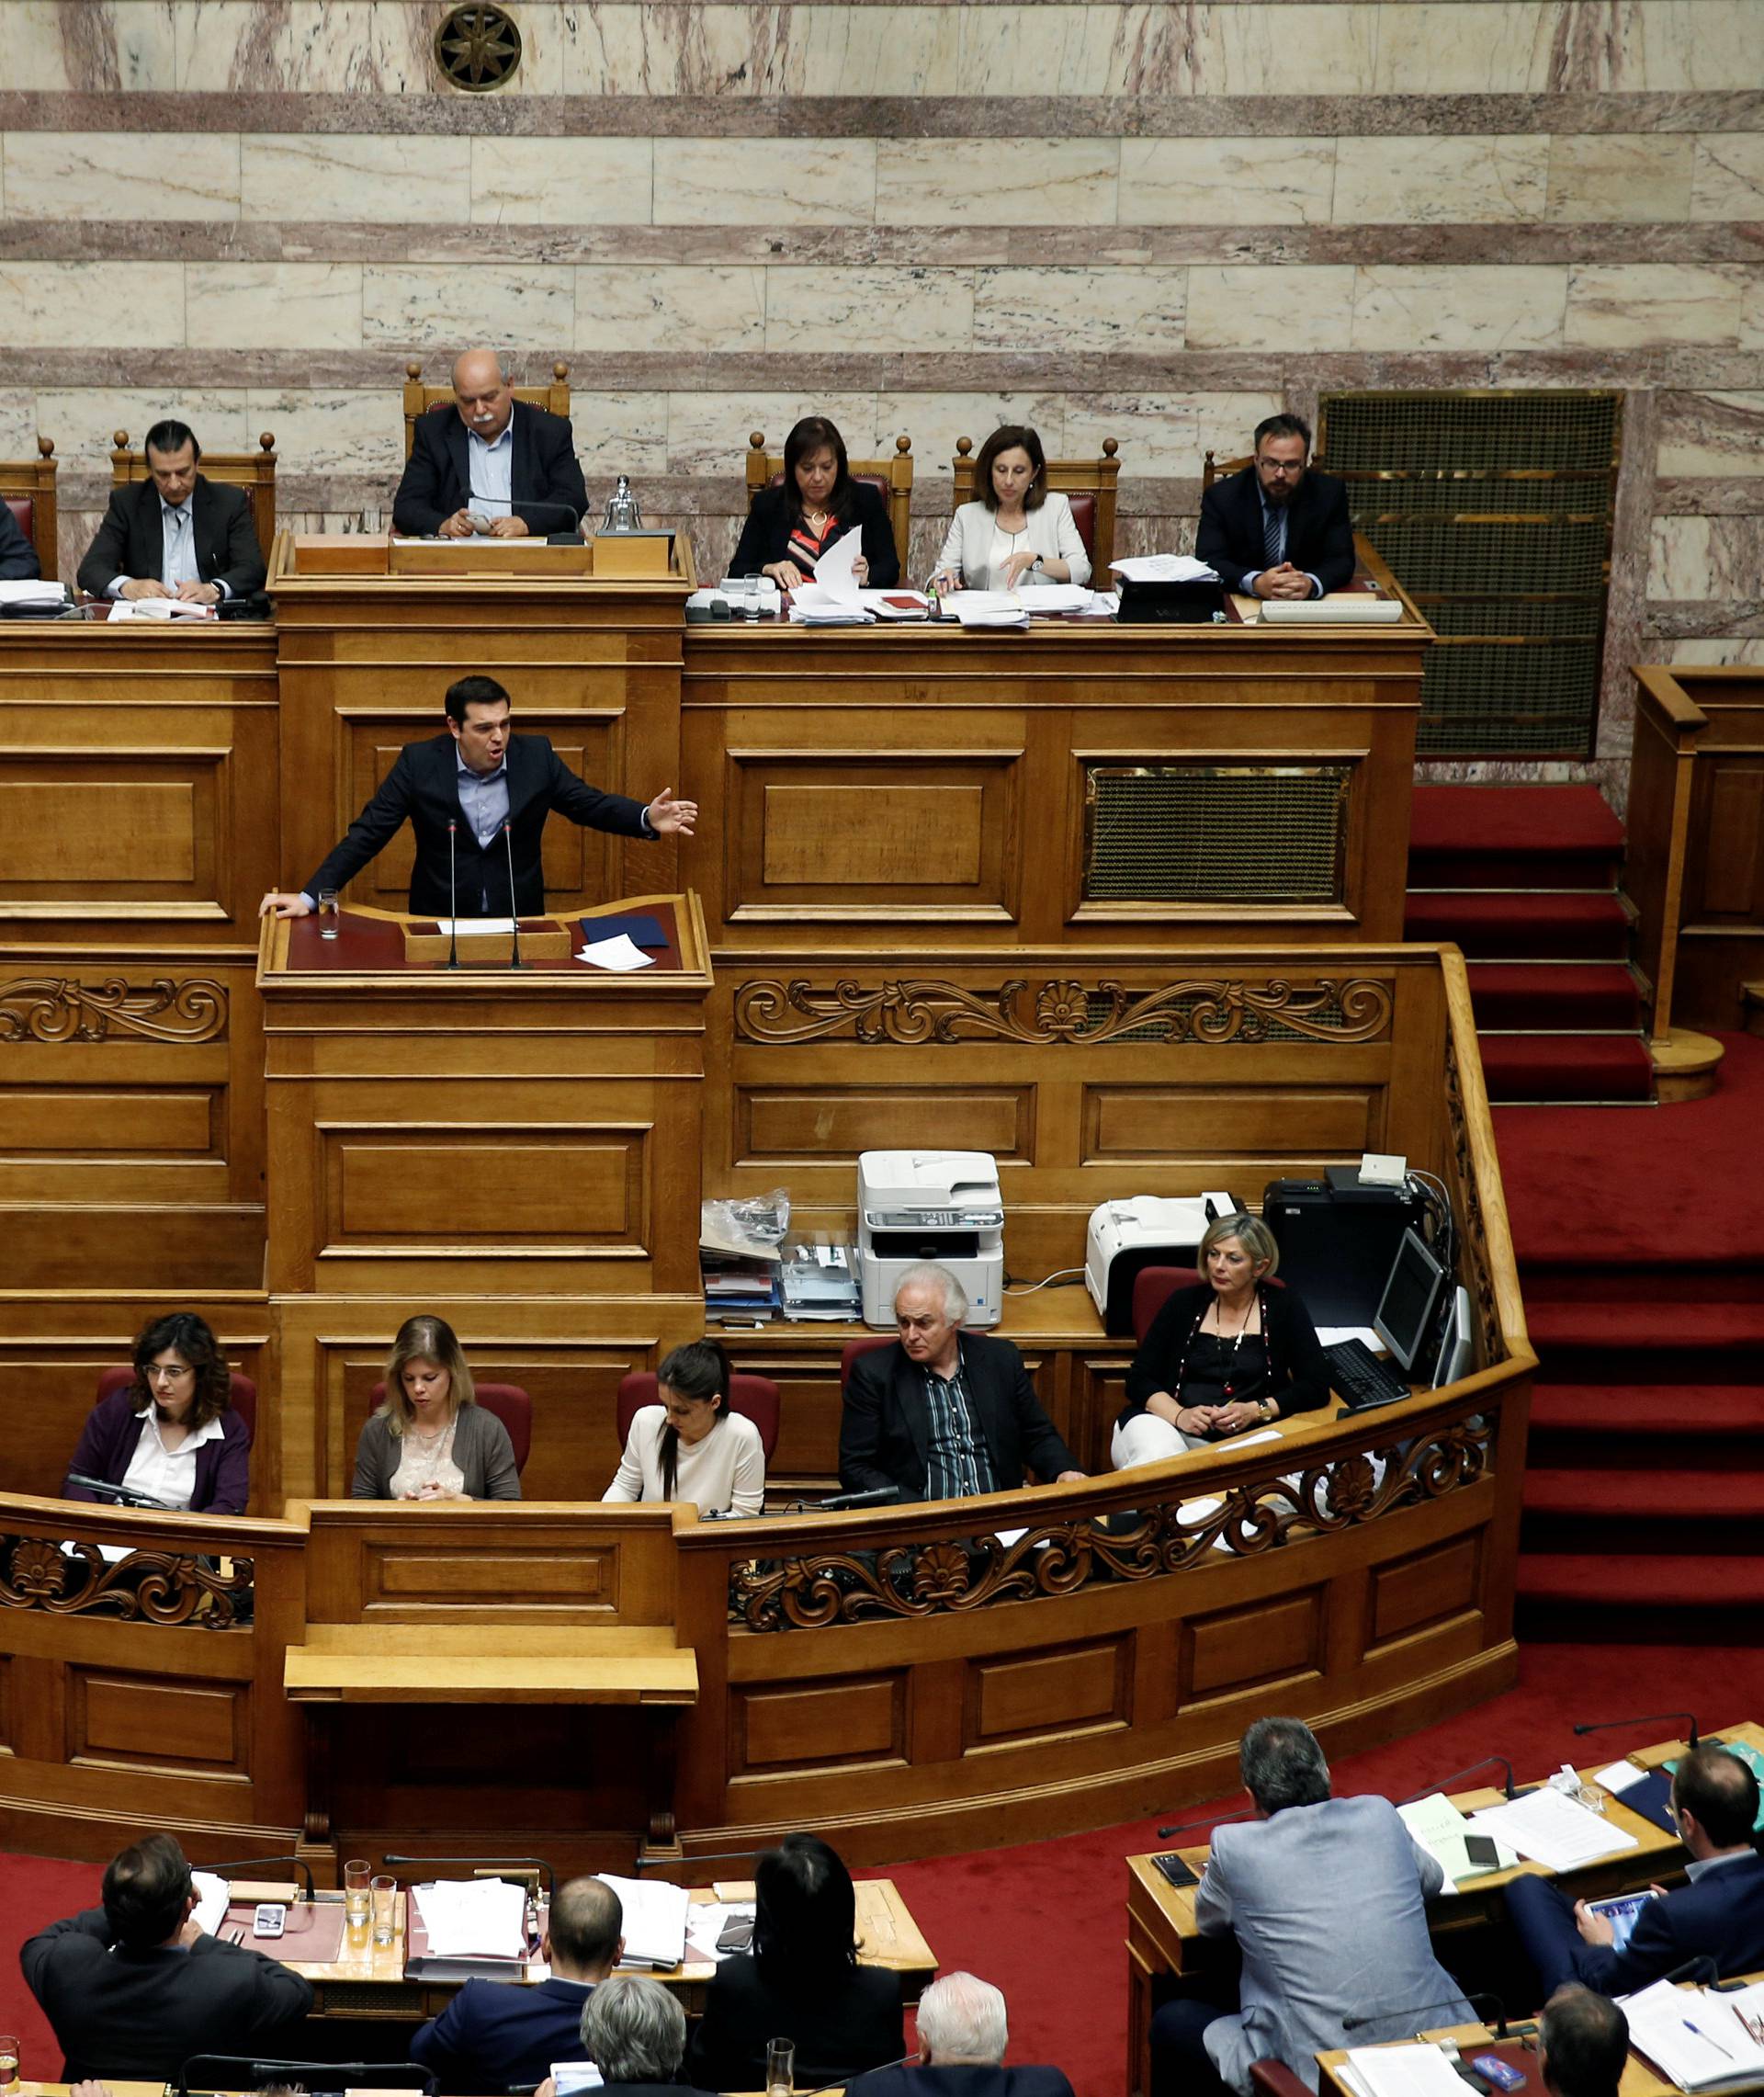 Greek PM Tsipras addresses lawmakers during a parliamentary session before a vote of tax and pension reforms in Athens